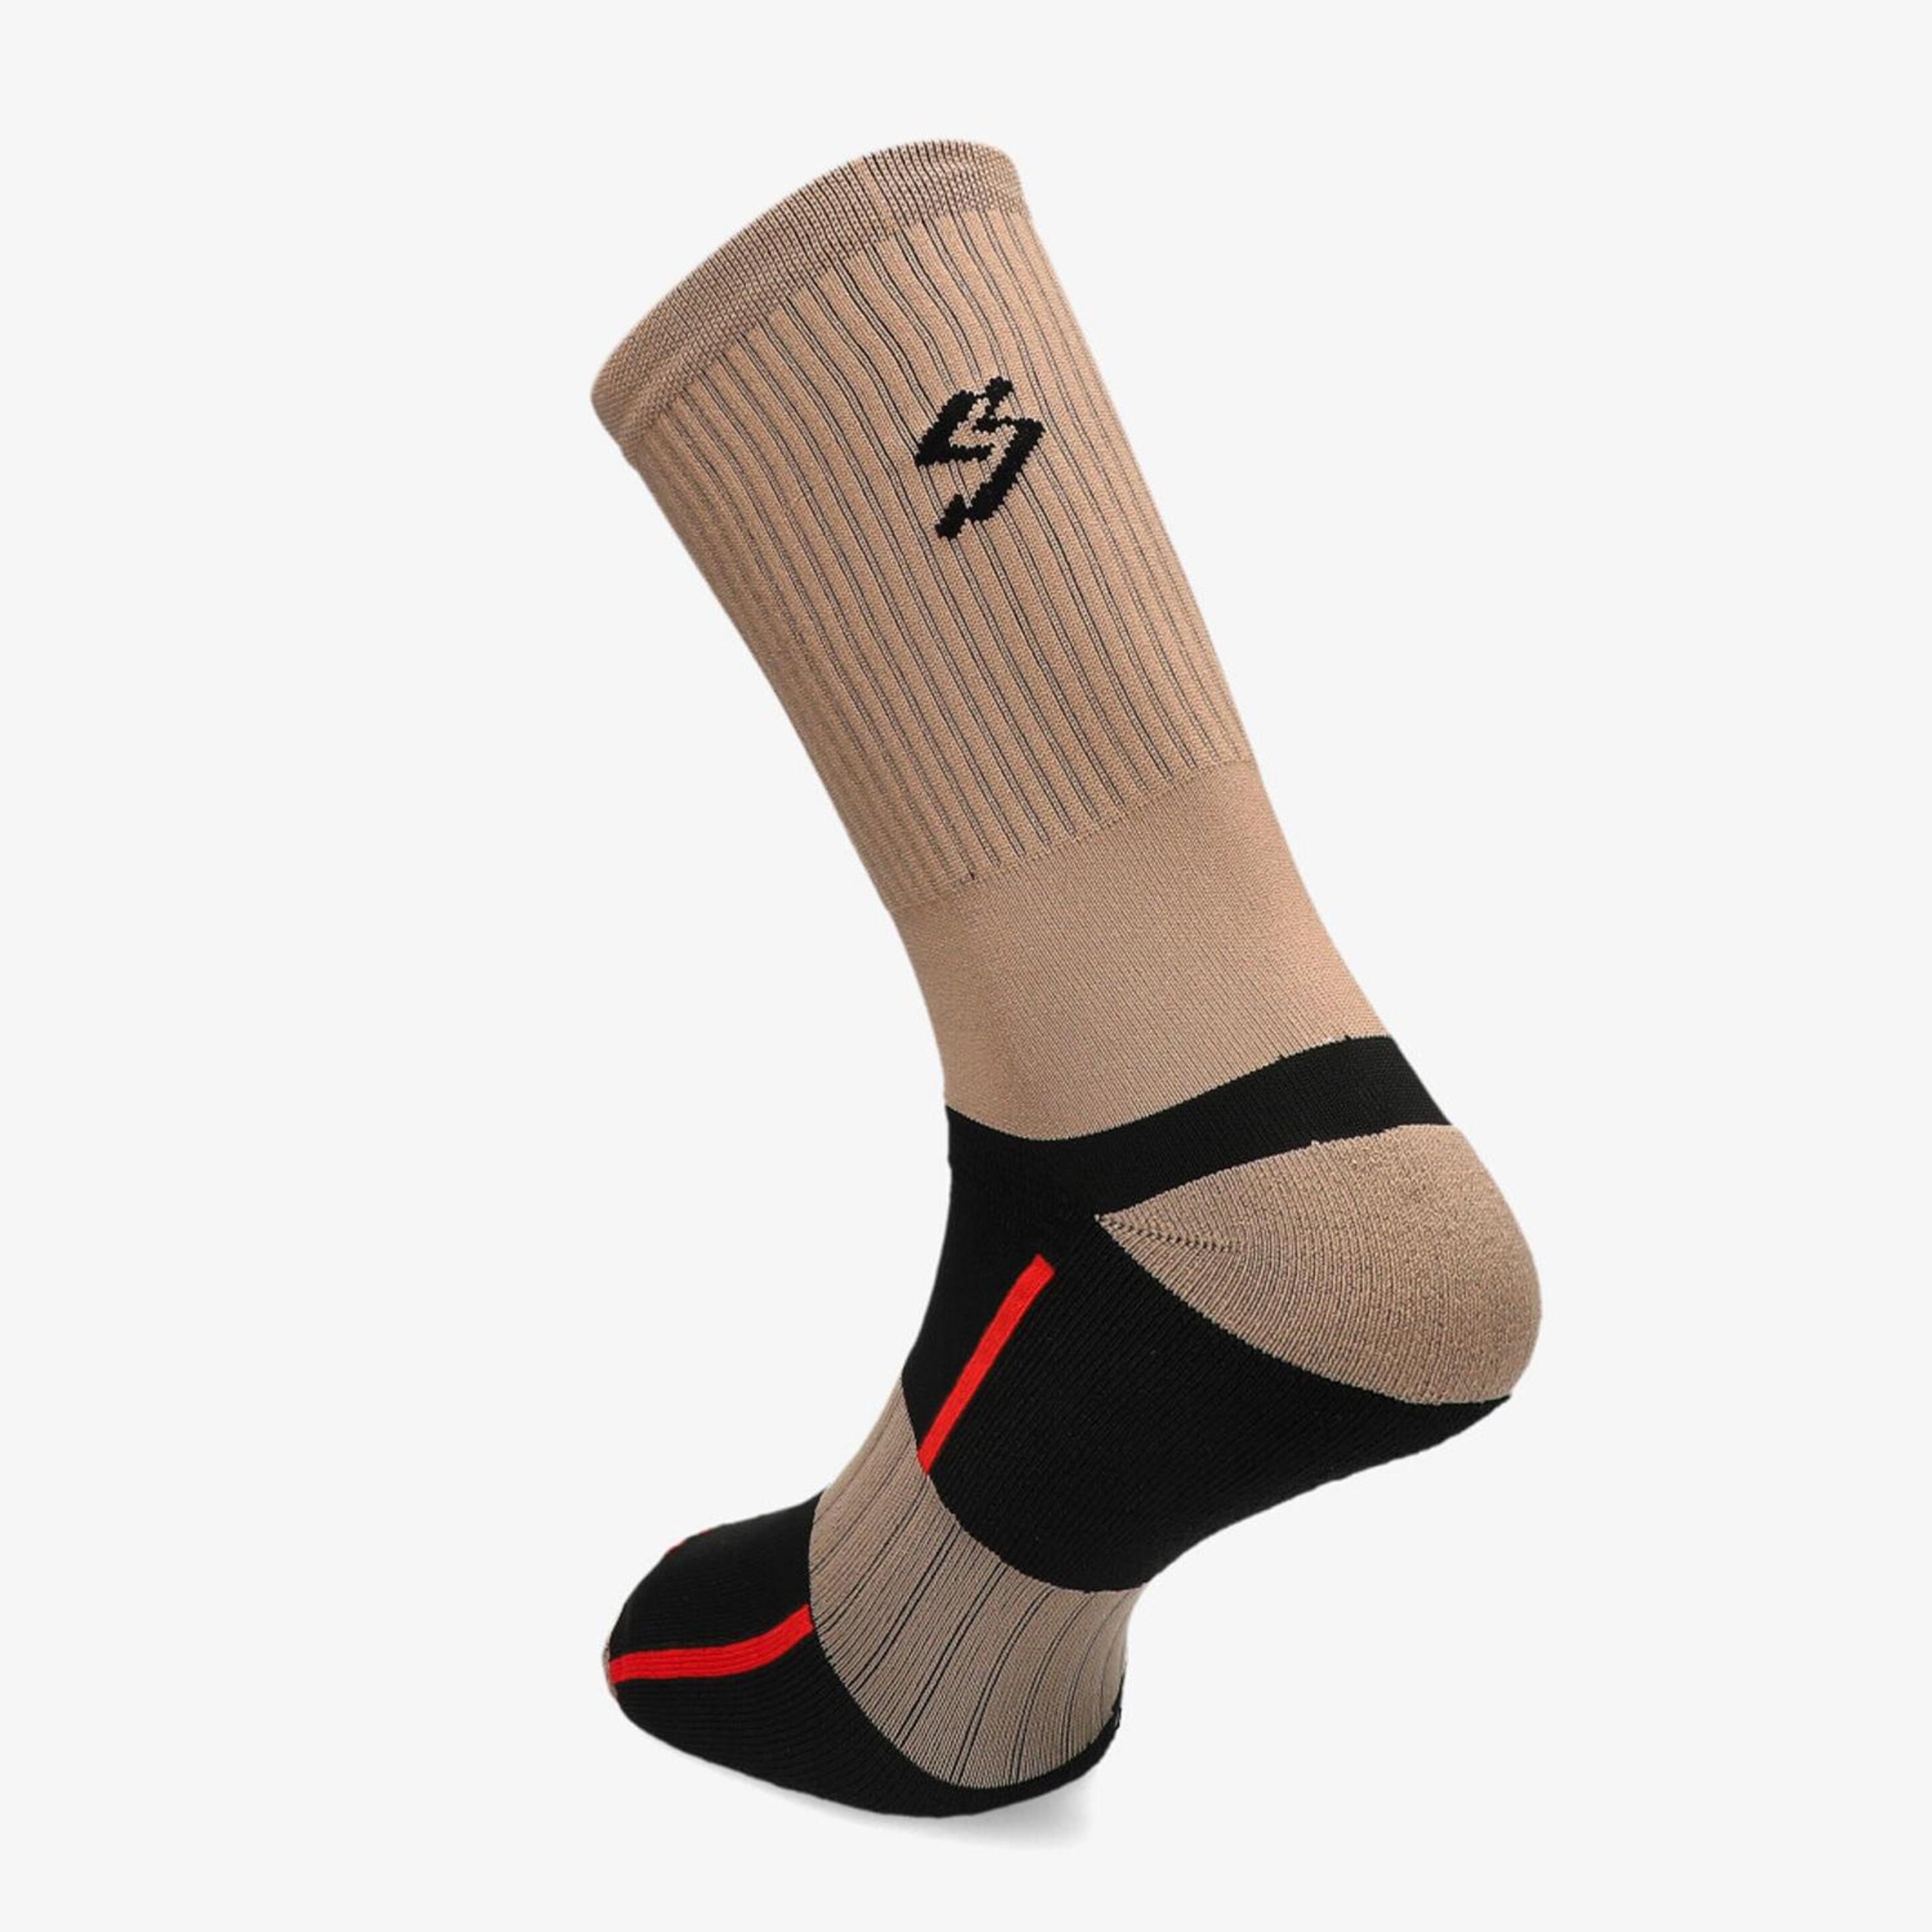 Spiuk All Terrain - Marrón - Calcetines Ciclismo Unisex